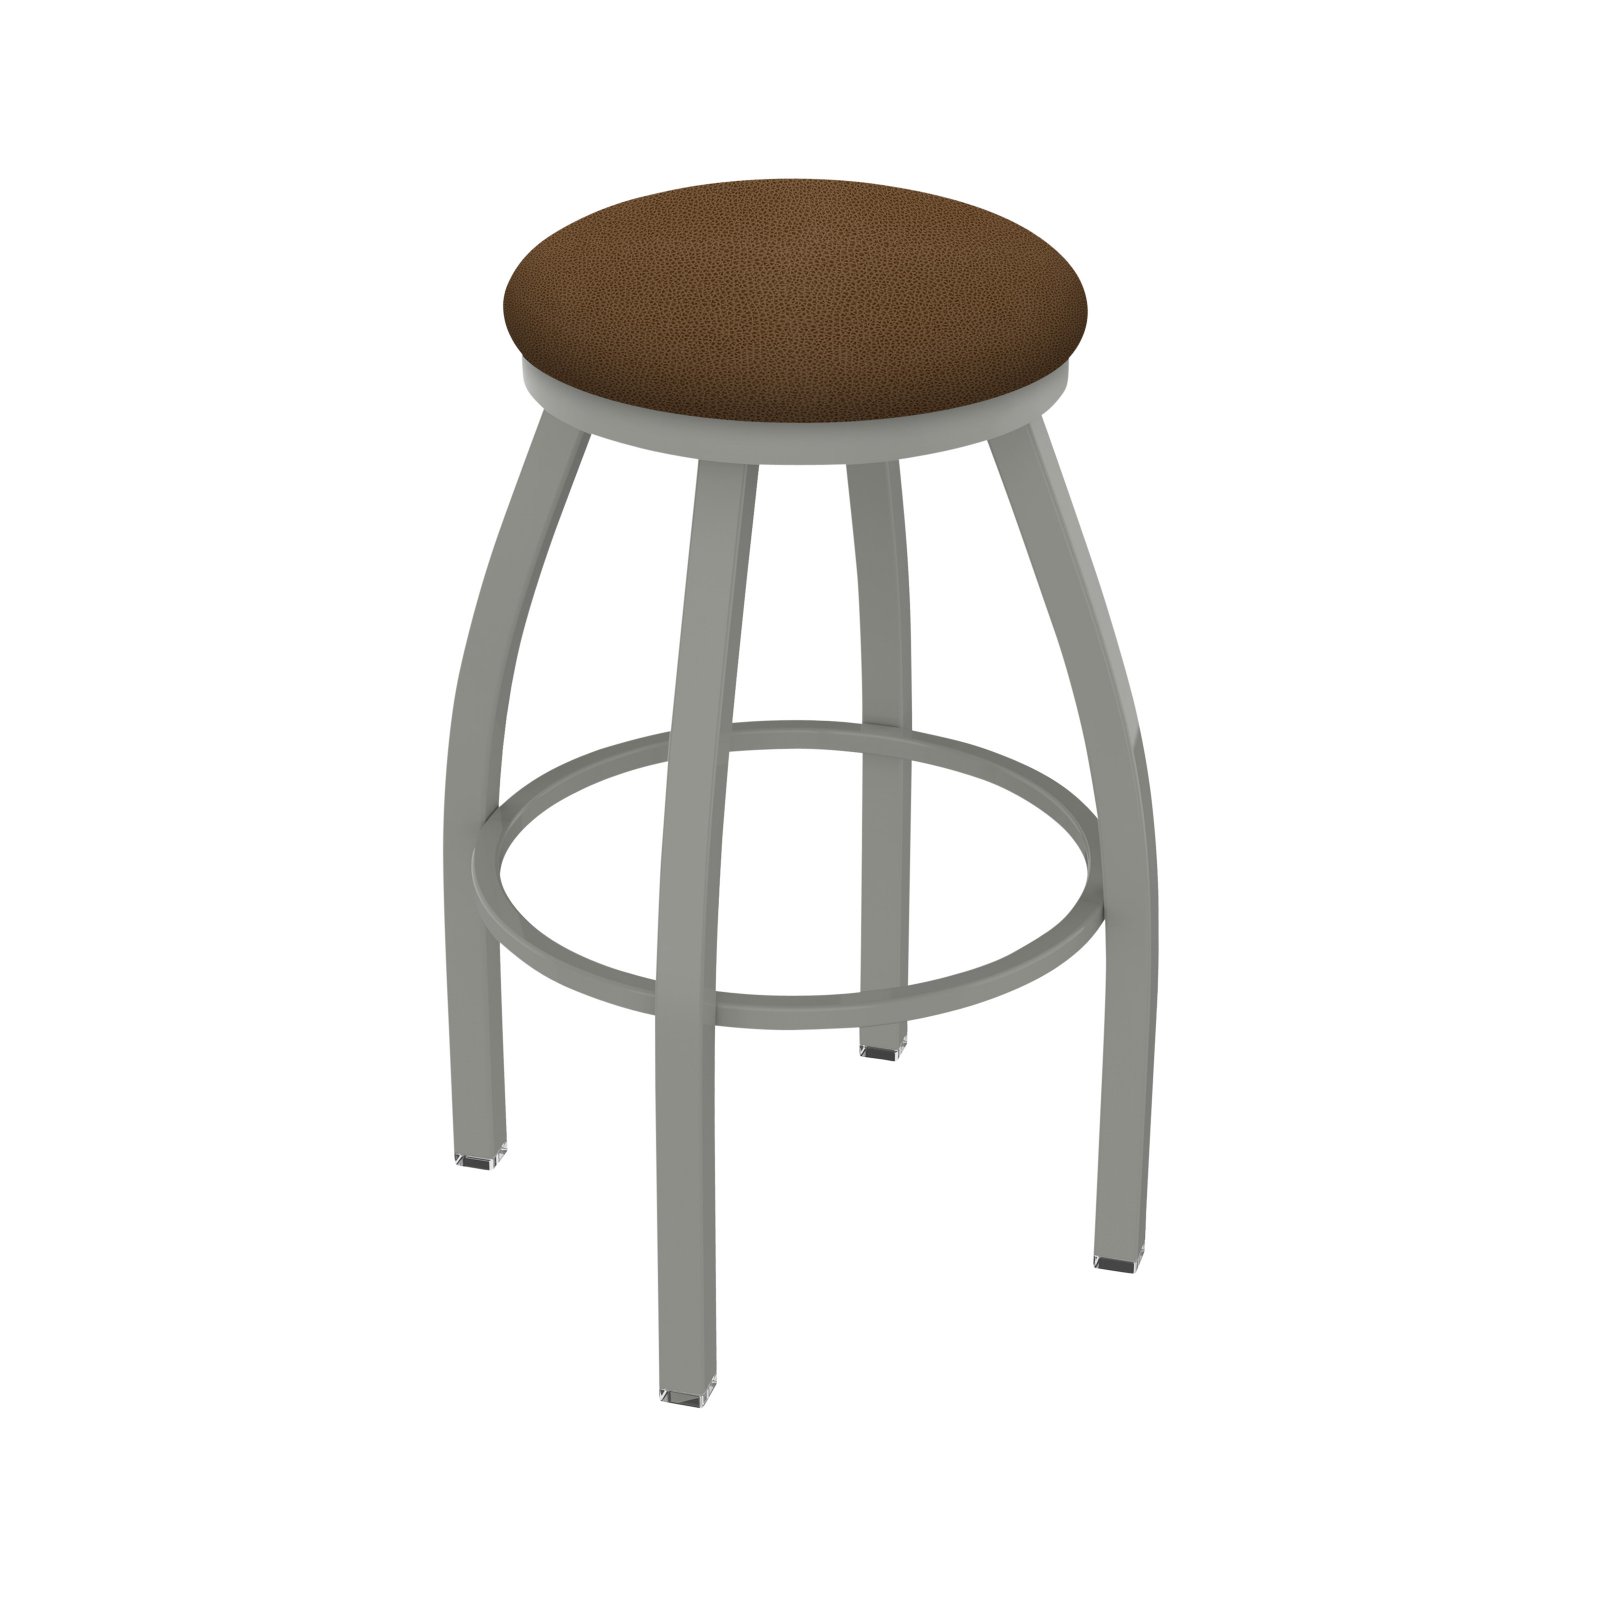 XL 802 Misha 25" Swivel Counter Stool with Bronze Finish and Rein Thatch Seat - image 1 of 2